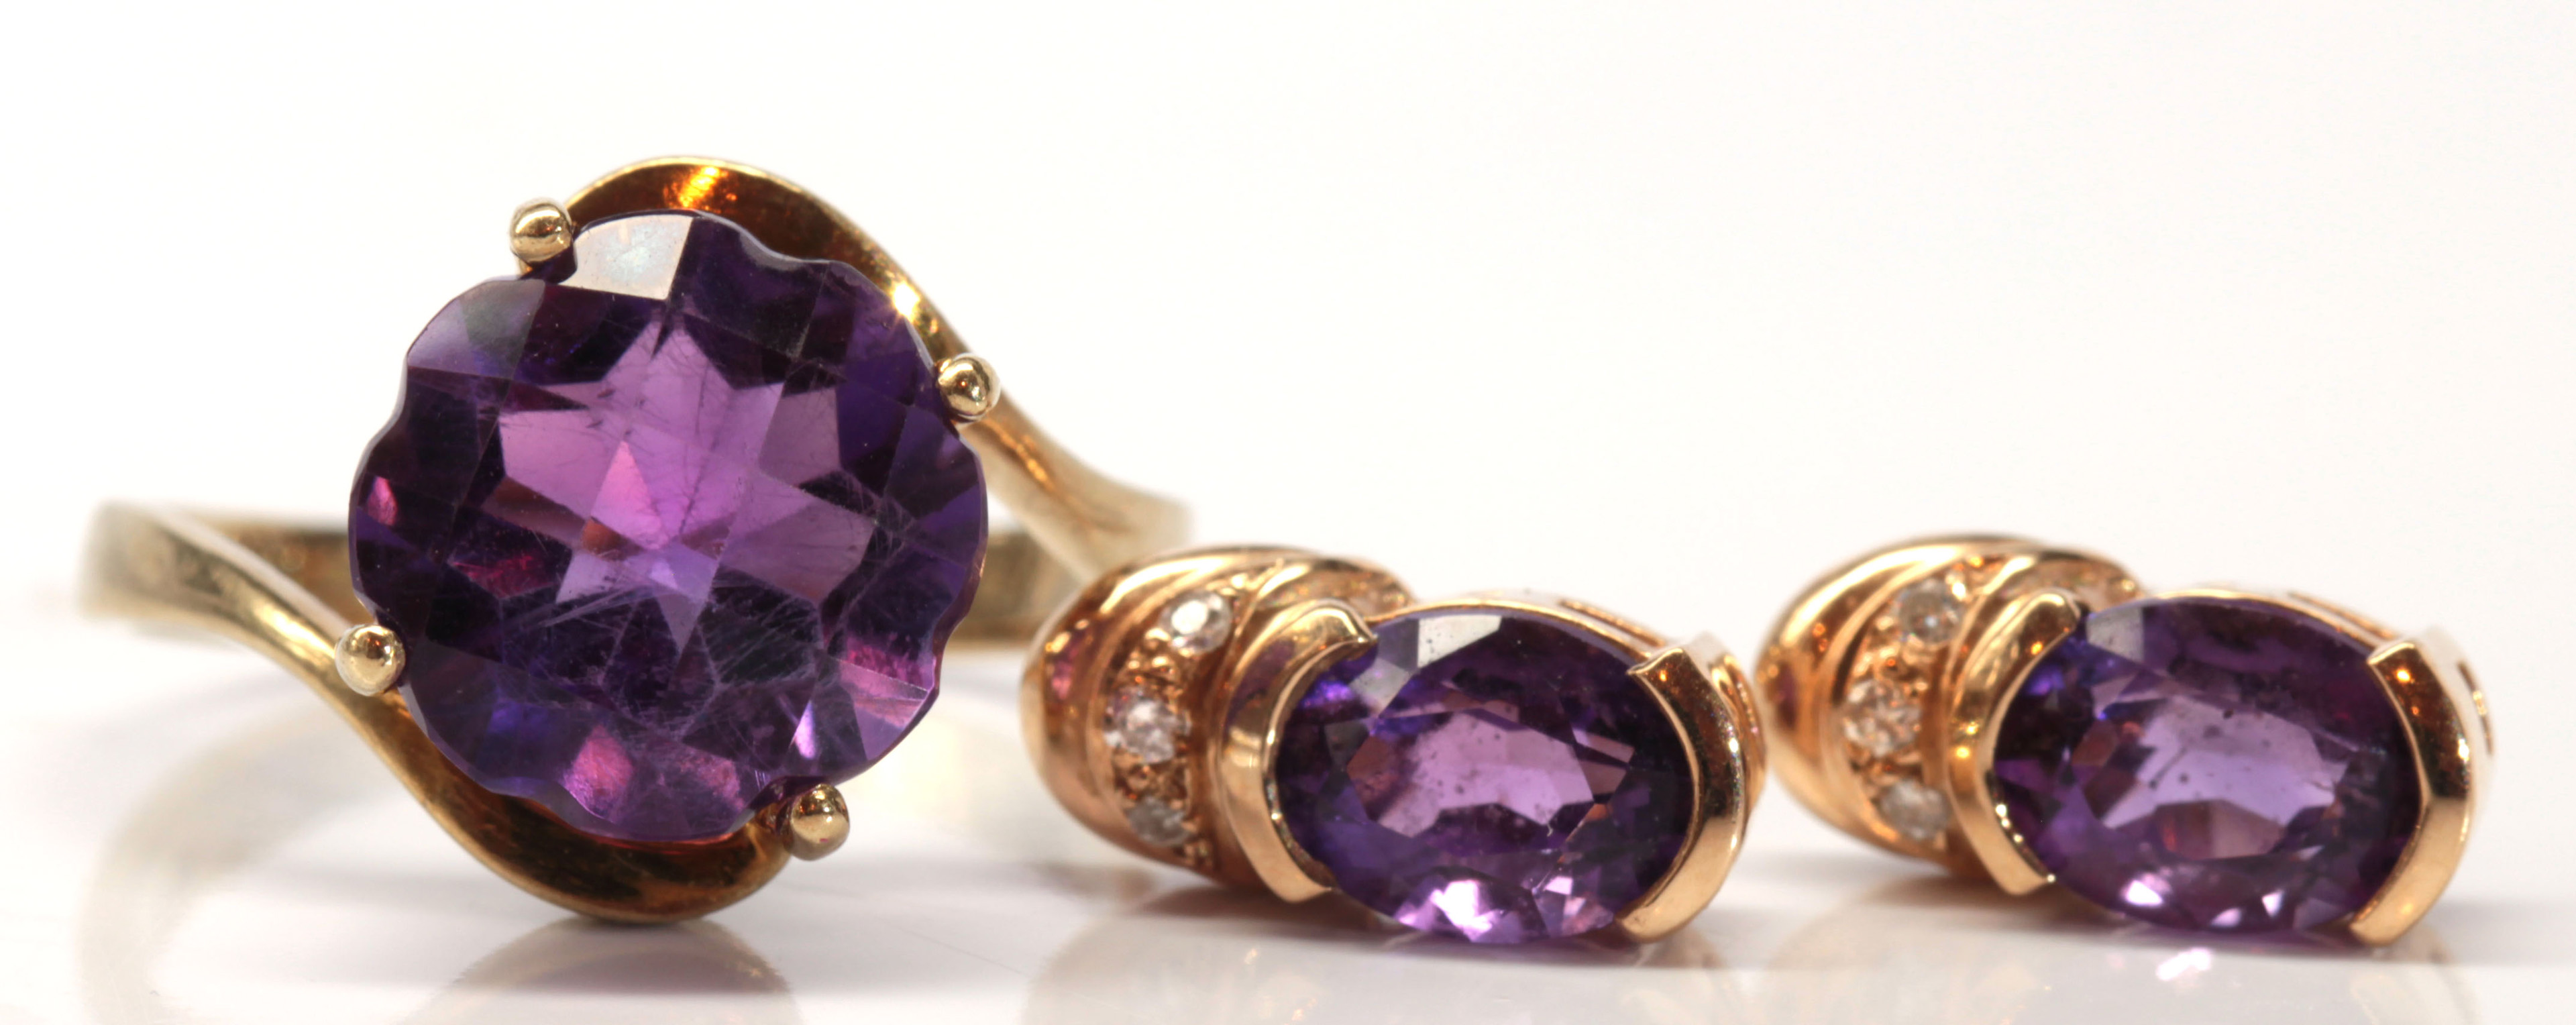 (Lot of 2) amethyst, diamond, yellow gold jewelry suite